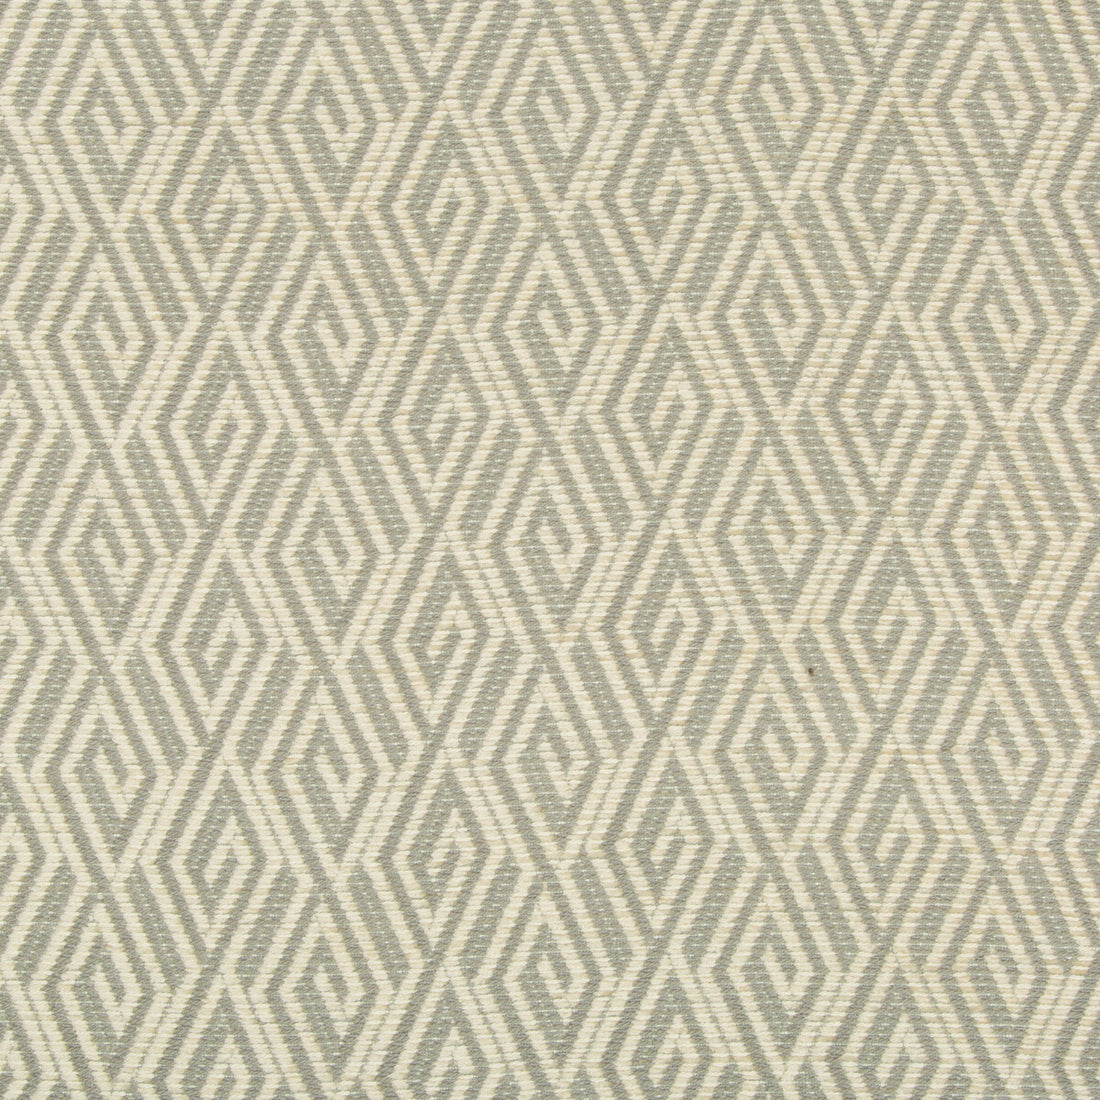 Kravet Contract fabric in 35044-11 color - pattern 35044.11.0 - by Kravet Contract in the Incase Crypton Gis collection